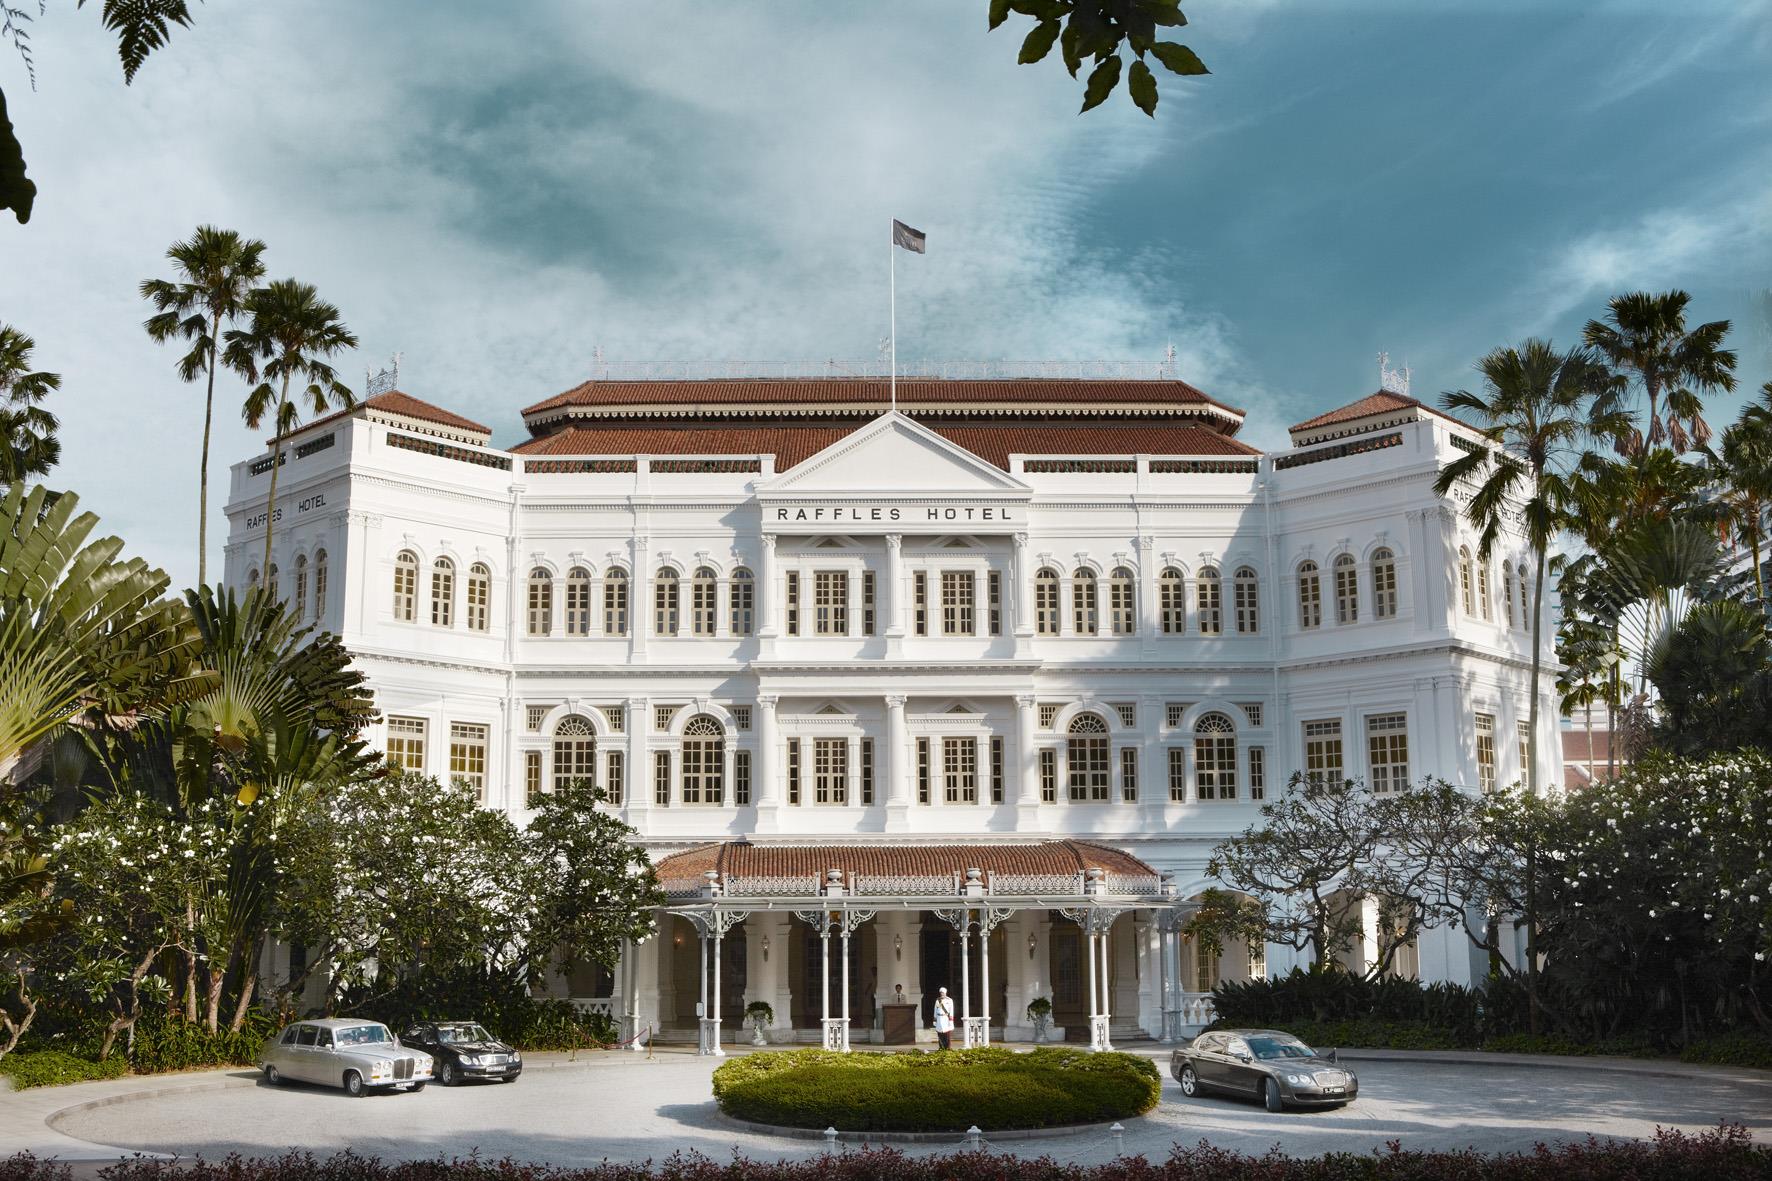 Raffles Singapore unveils new line-up of dining experiences by renowned celebrity chefs